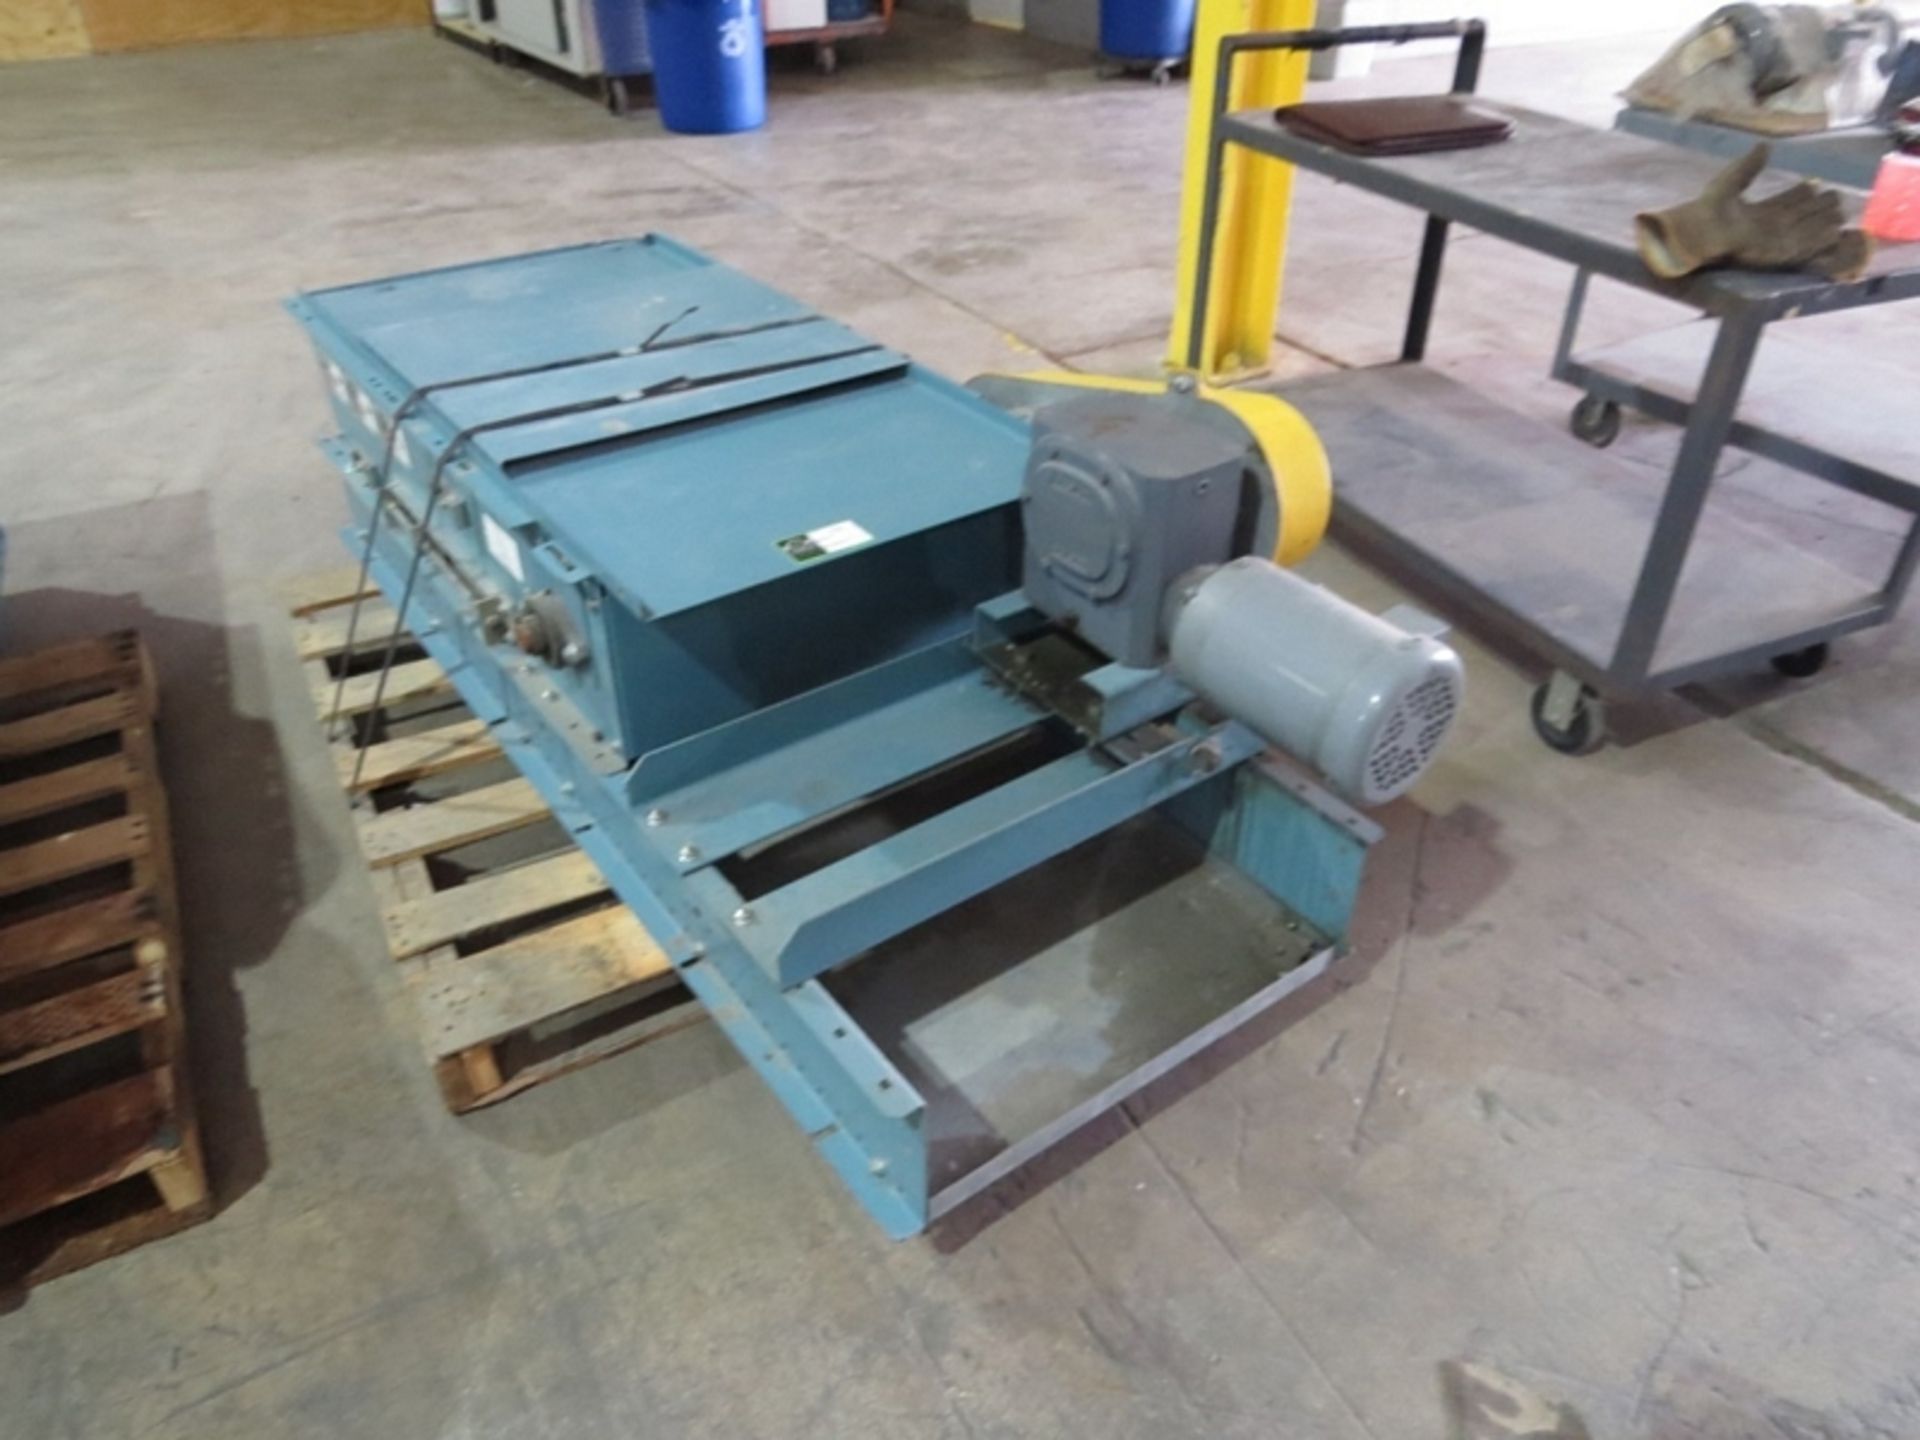 24" Conveyor Drive Component- ***Located in Chattanooga TN*** Driven by Boston Gear 1-1/2 hp